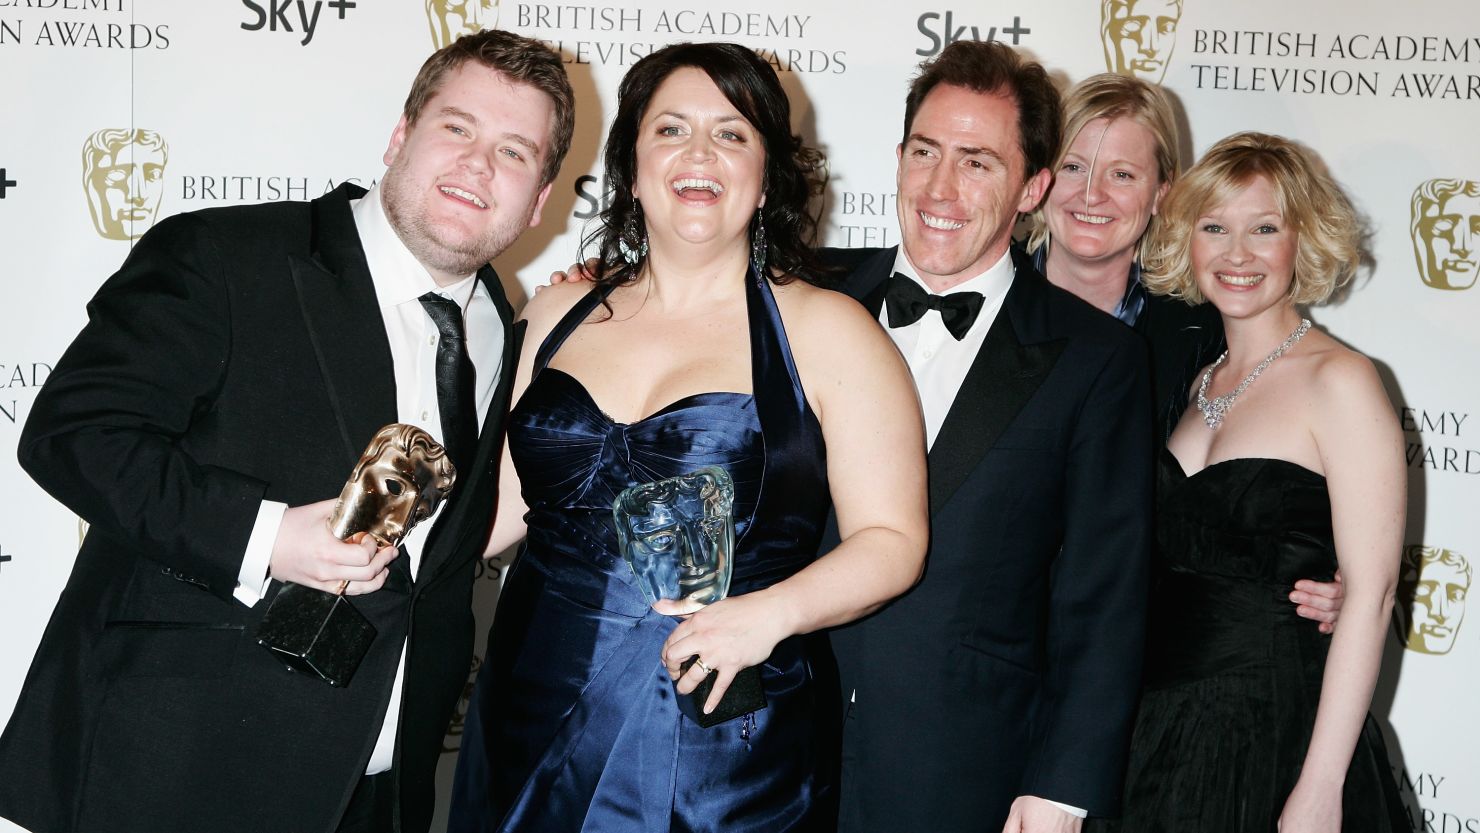 Gavin and Stacey's James Corden (left) and Ruth Jones (second left) pose with other members of the cast.